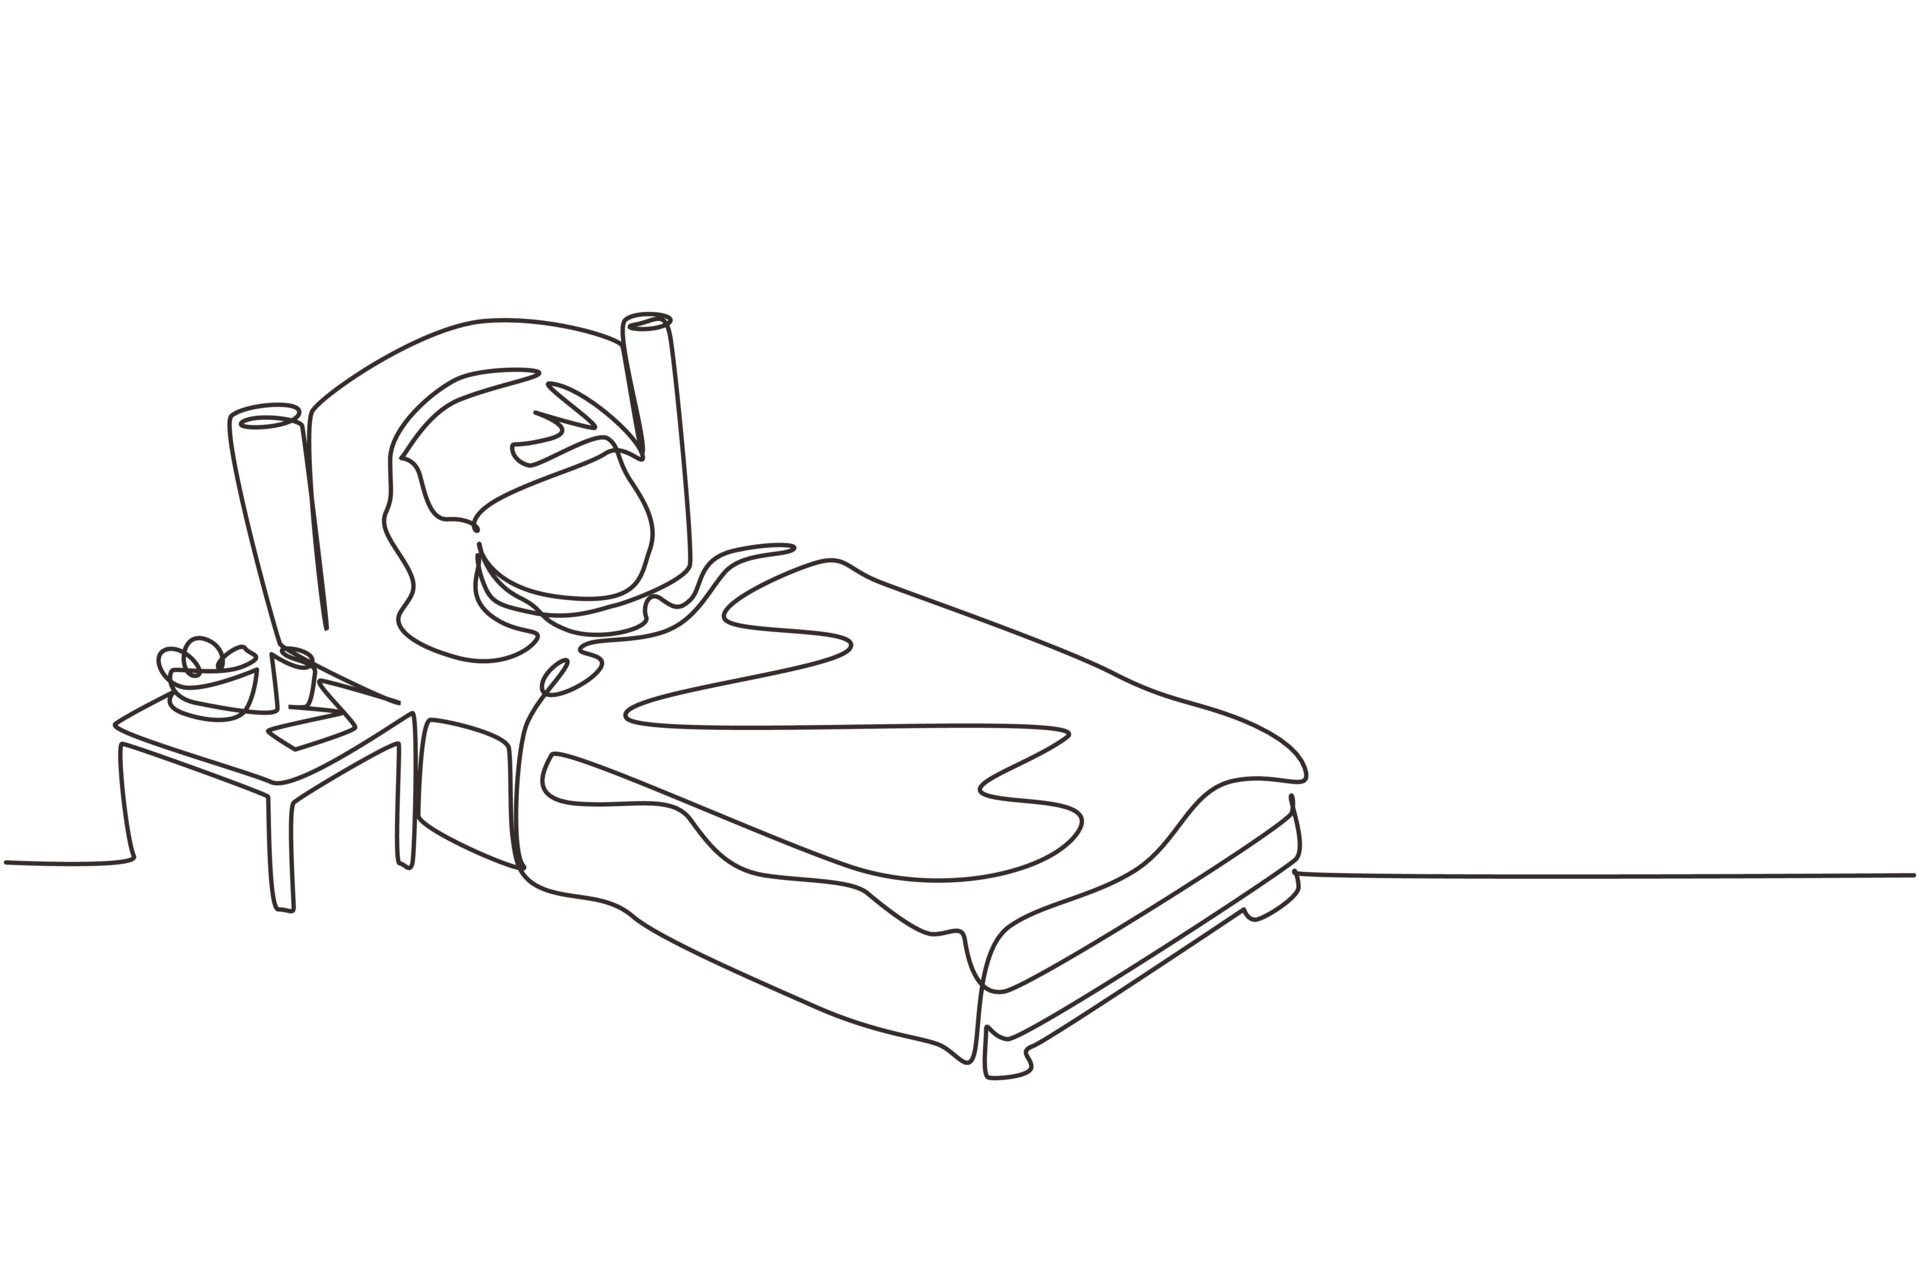 Single continuous line drawing sick girl with high fever. Child is sick  with flu or coronavirus. Kid lying in bed feel so bad with fever.  Healthcare symbol. Dynamic one line draw graphic